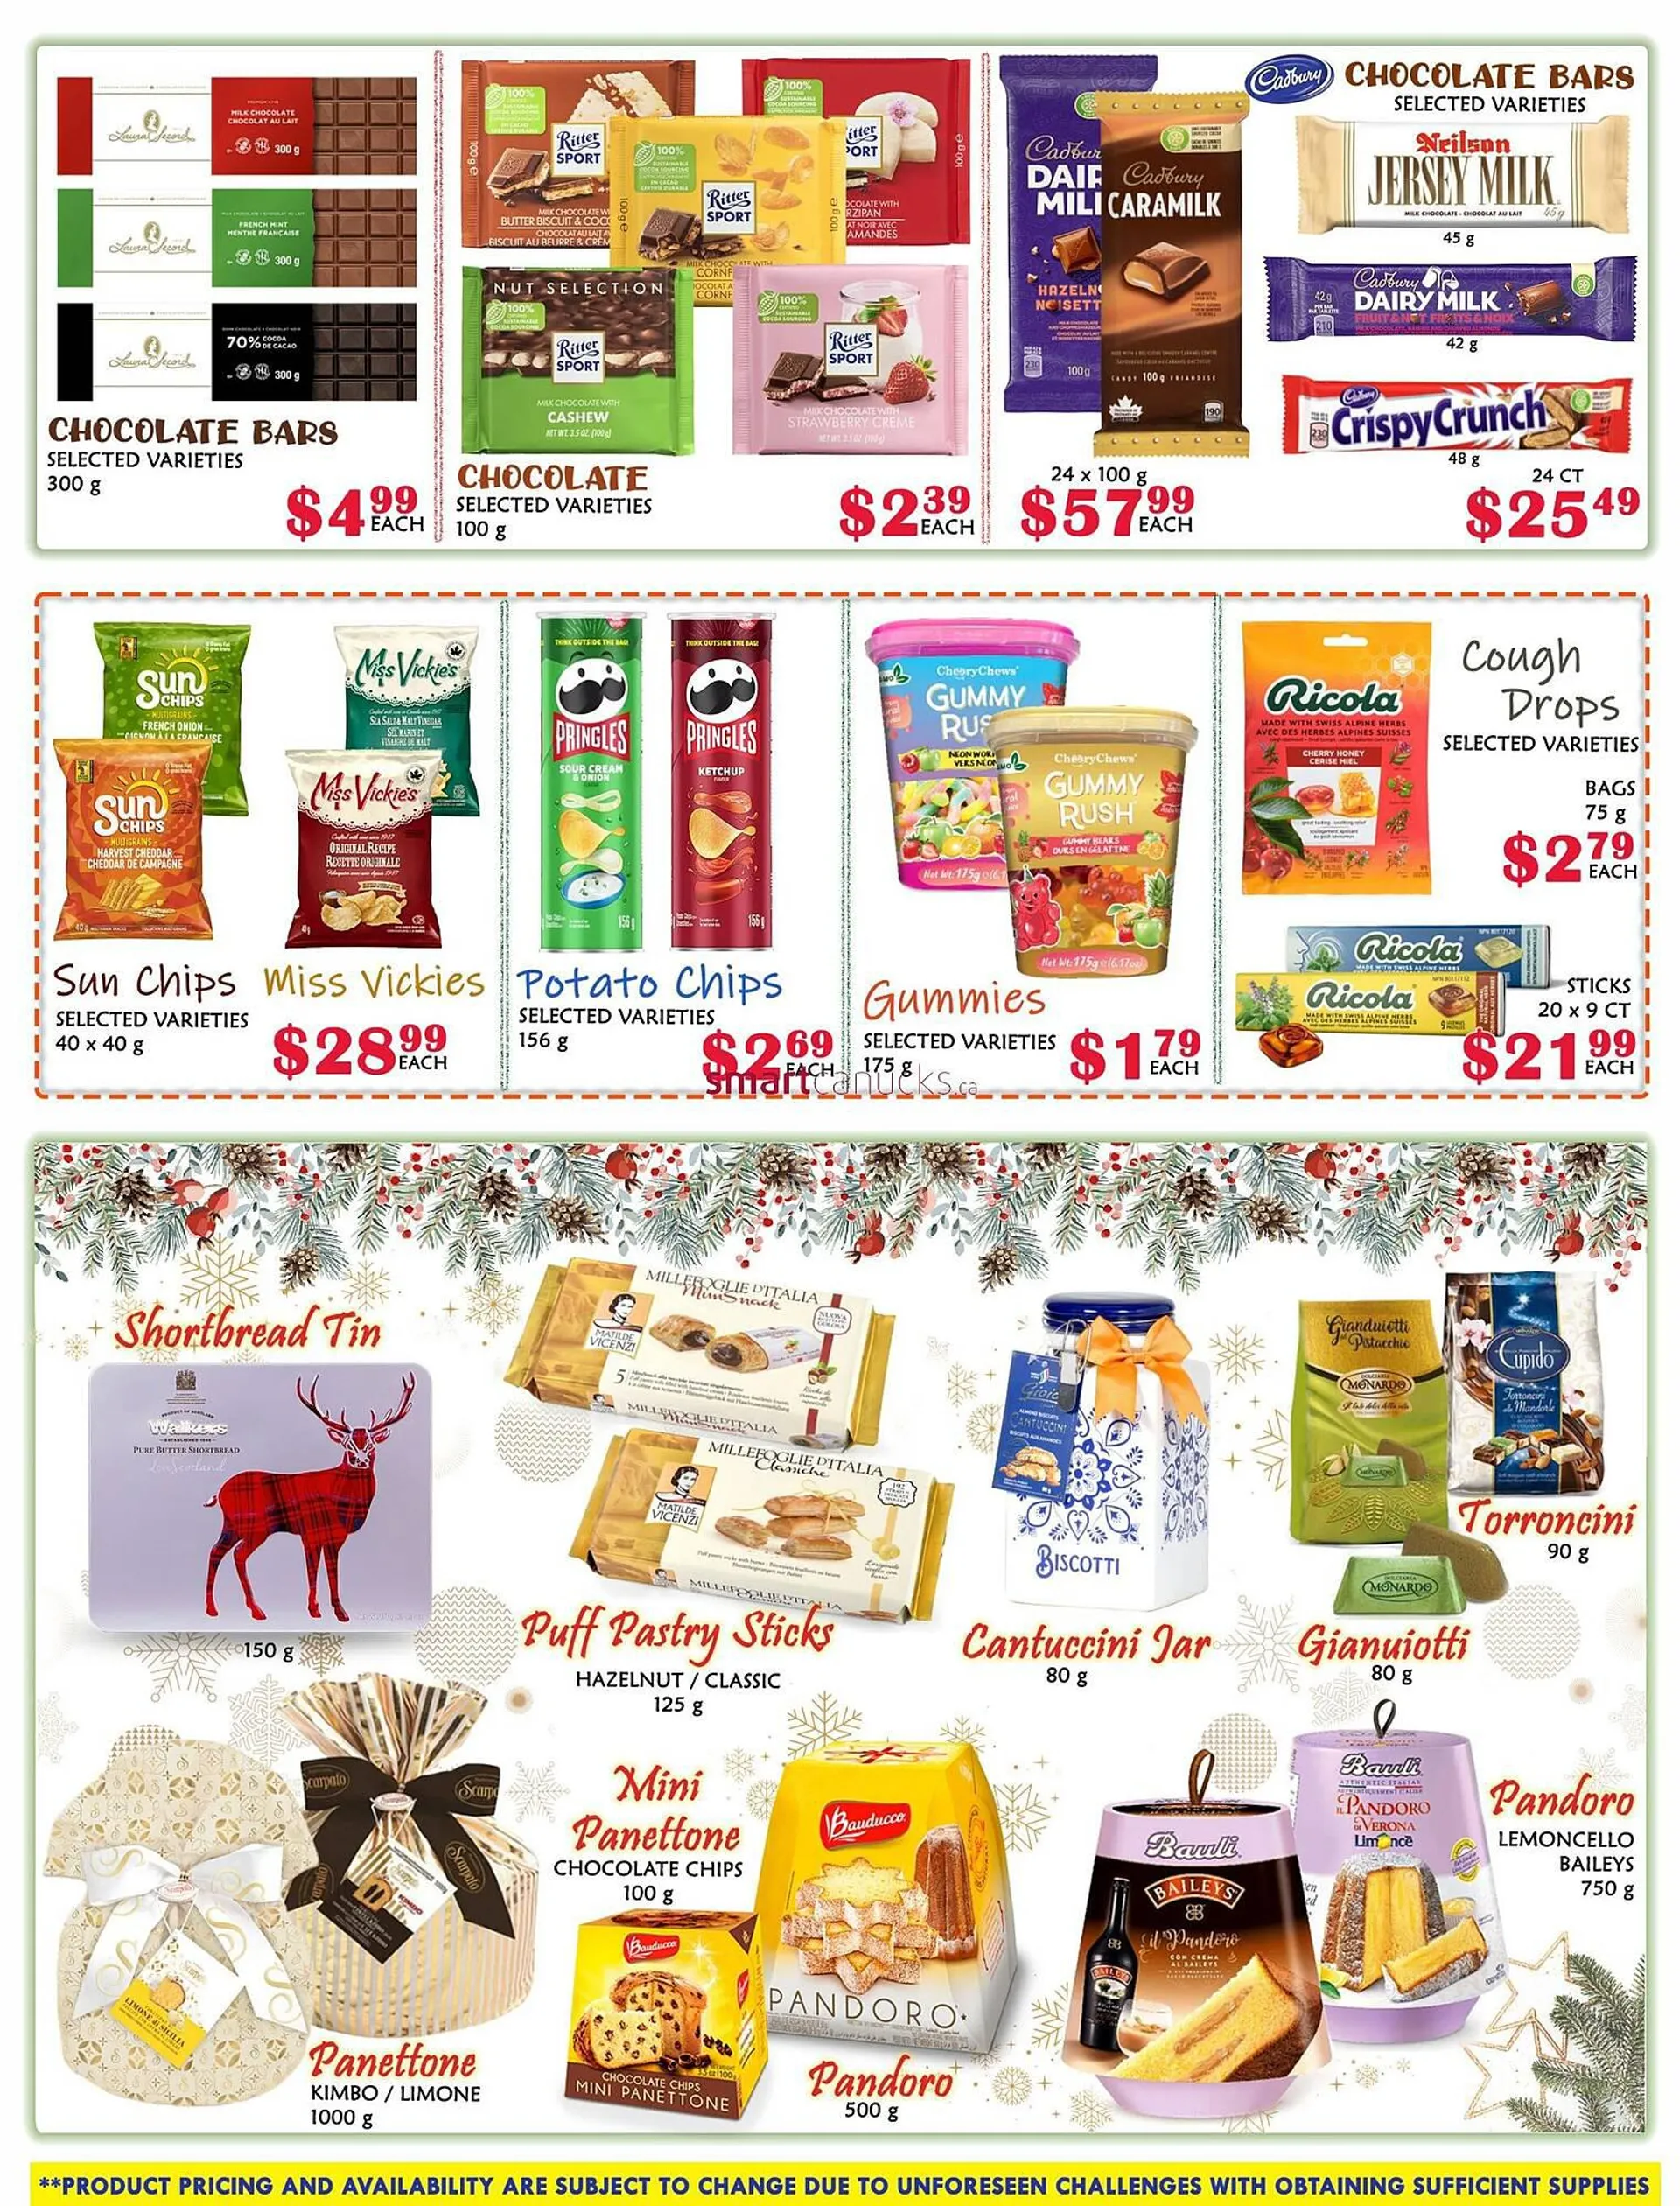 MVR Cash & Carry flyer - 8